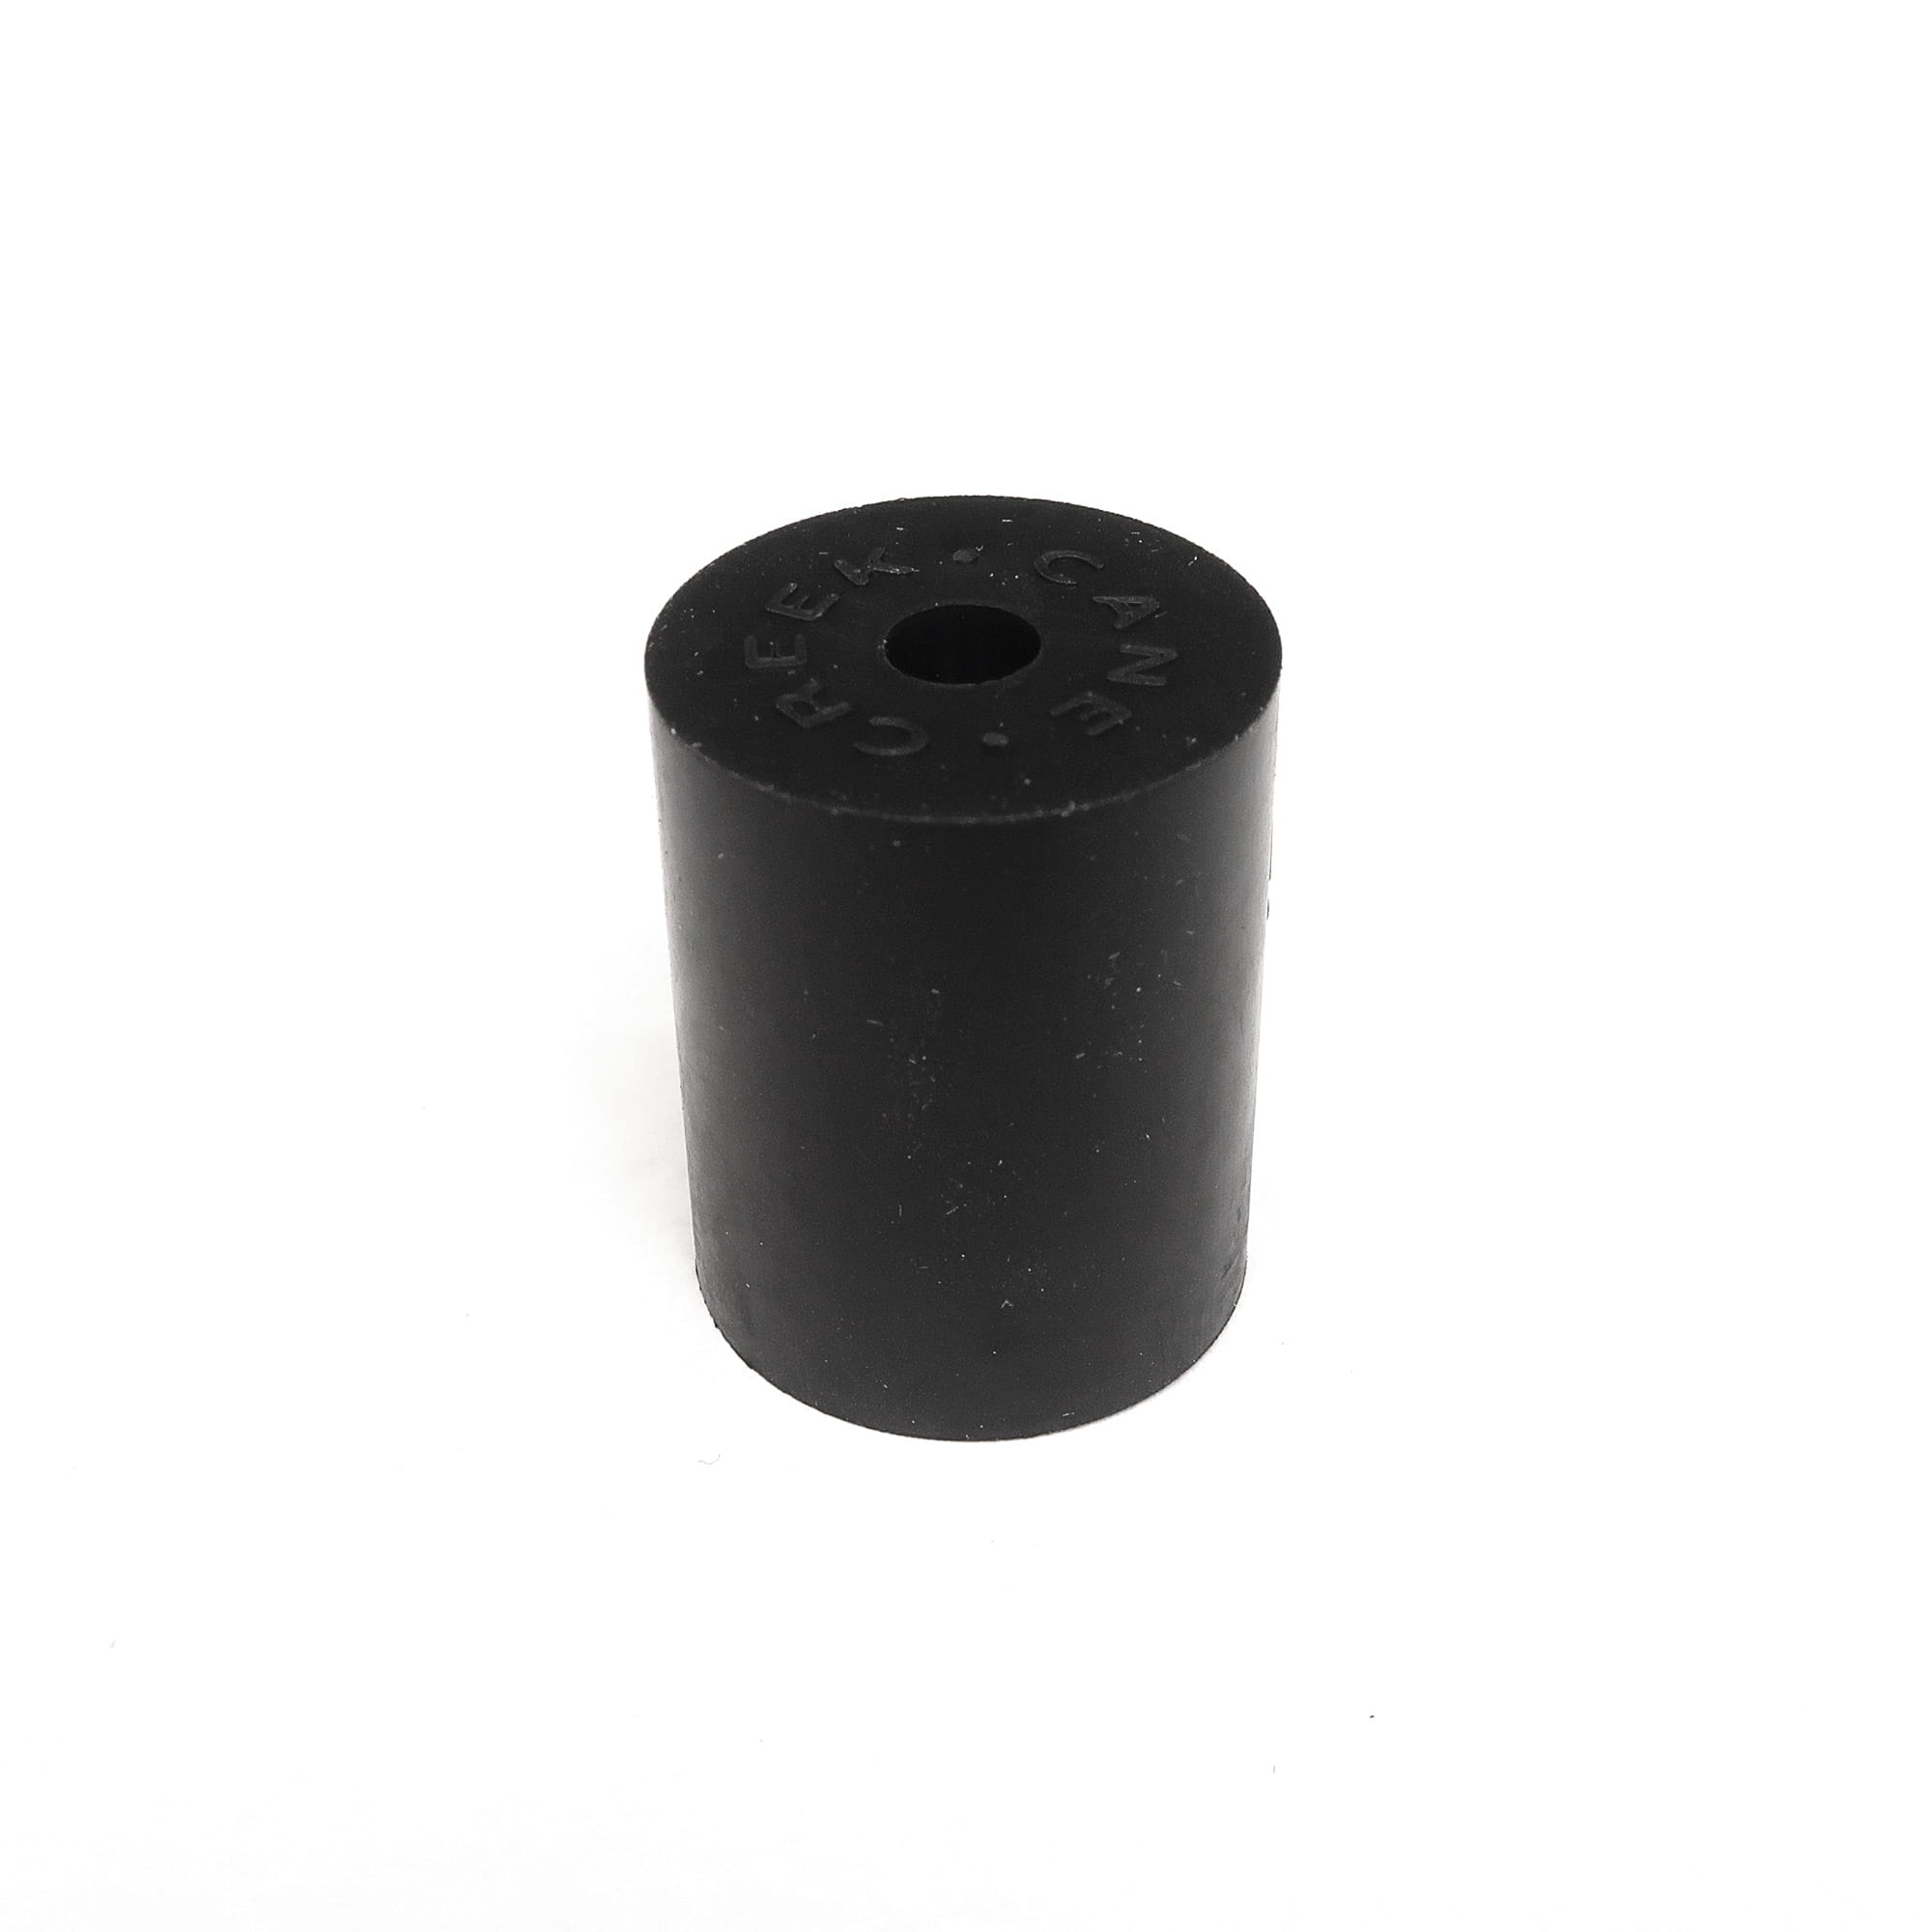 Cane Creek Elastomer for Thudbuster LT G3 Seat Post